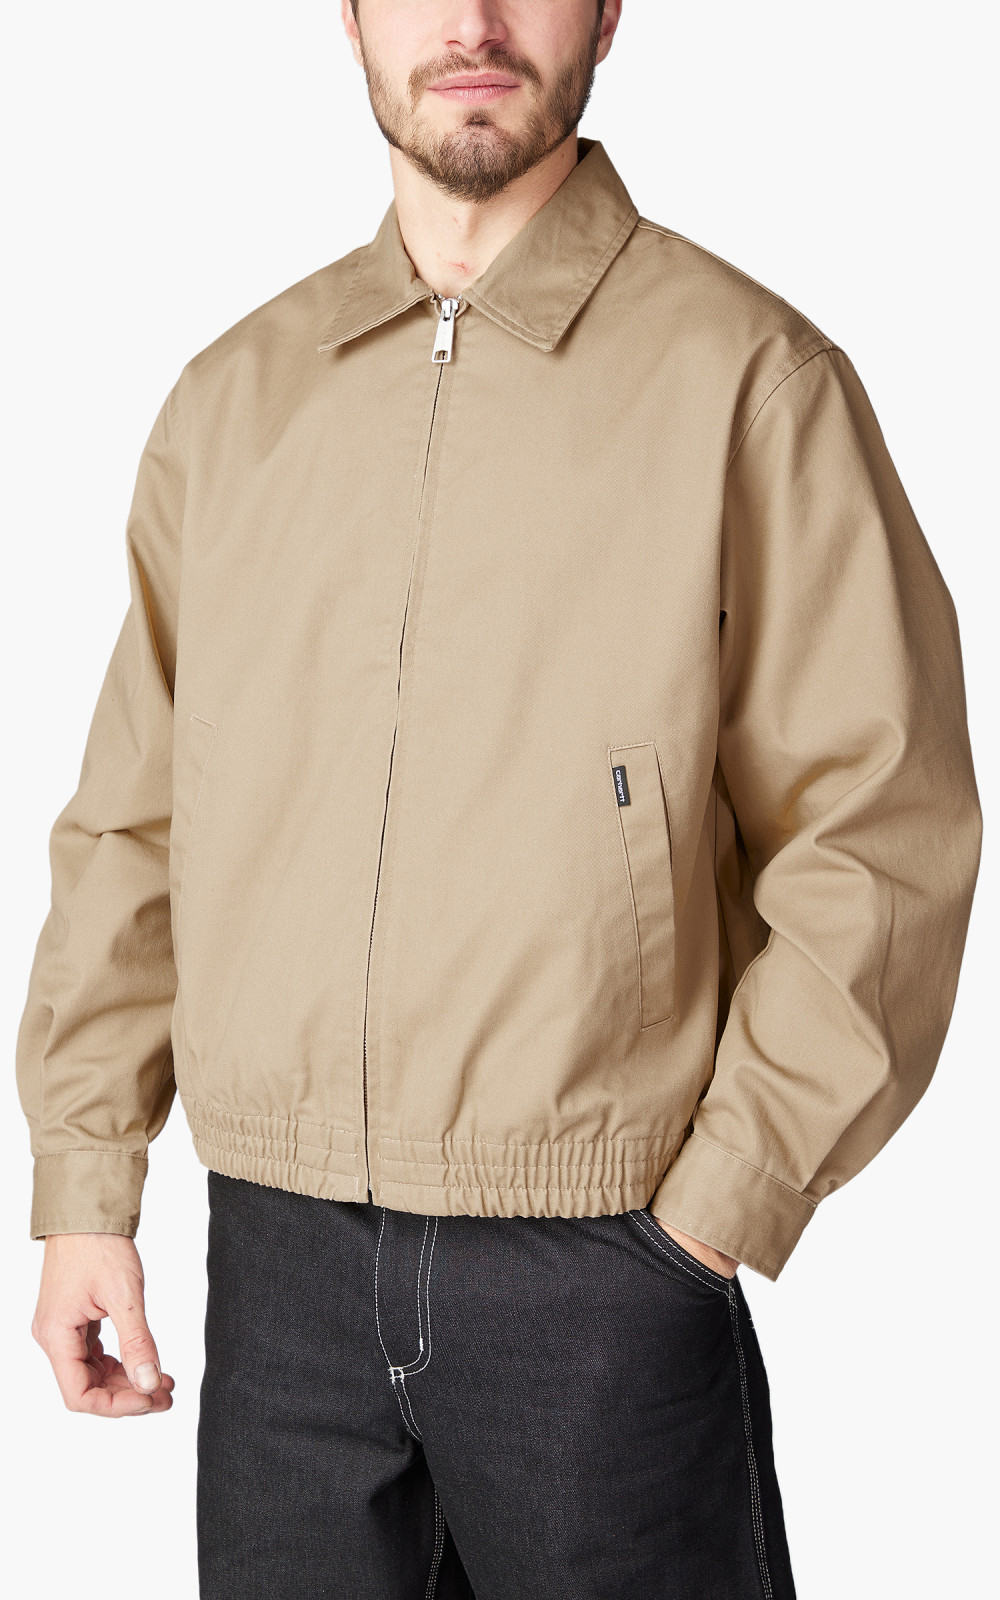 Carhartt WIP Newhaven Jacket Sable Rinsed | Cultizm